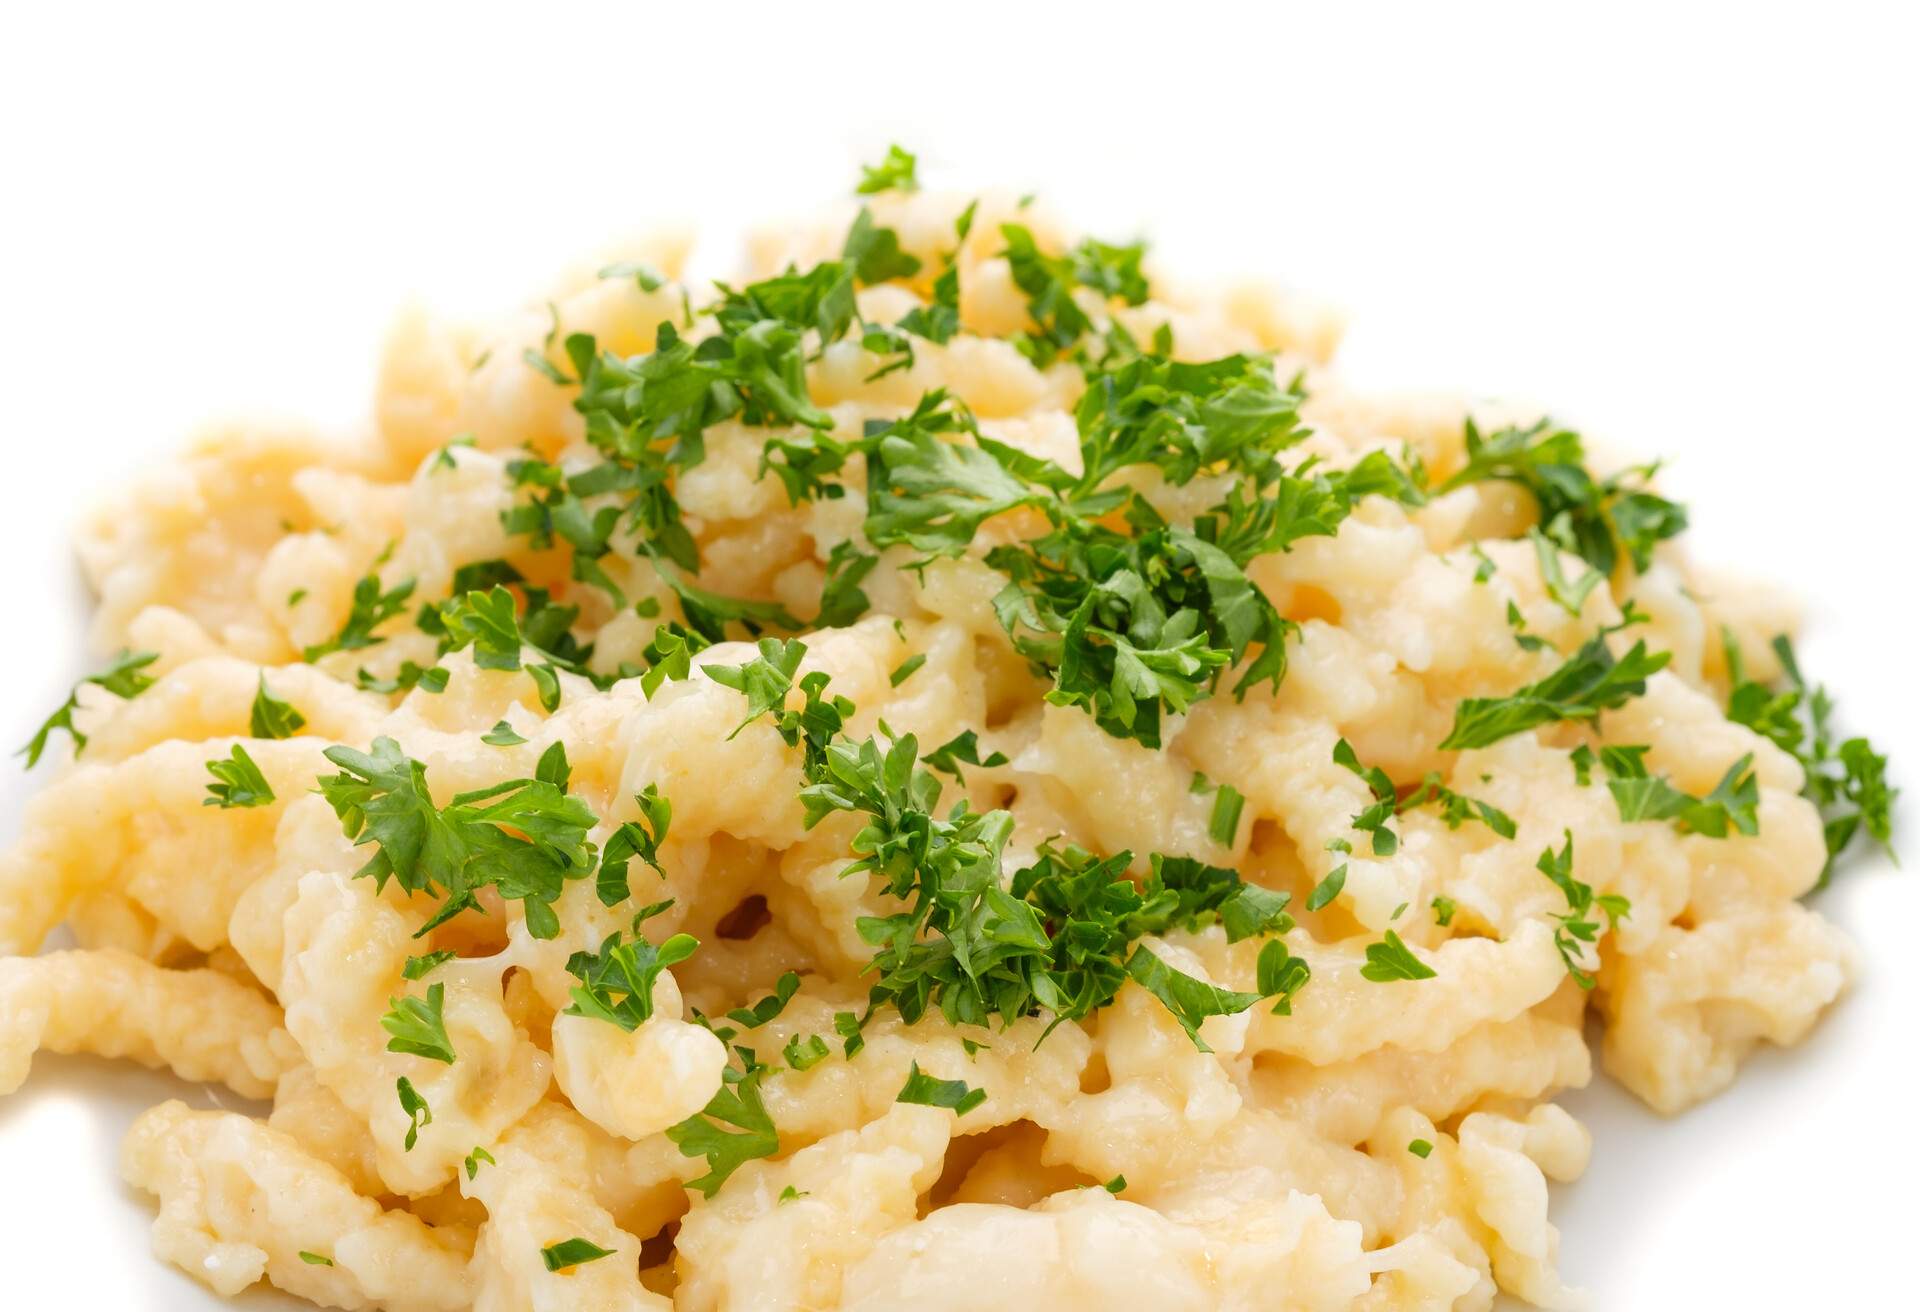 German speciality Käsespätzle cheese noodles with gruyere and chives